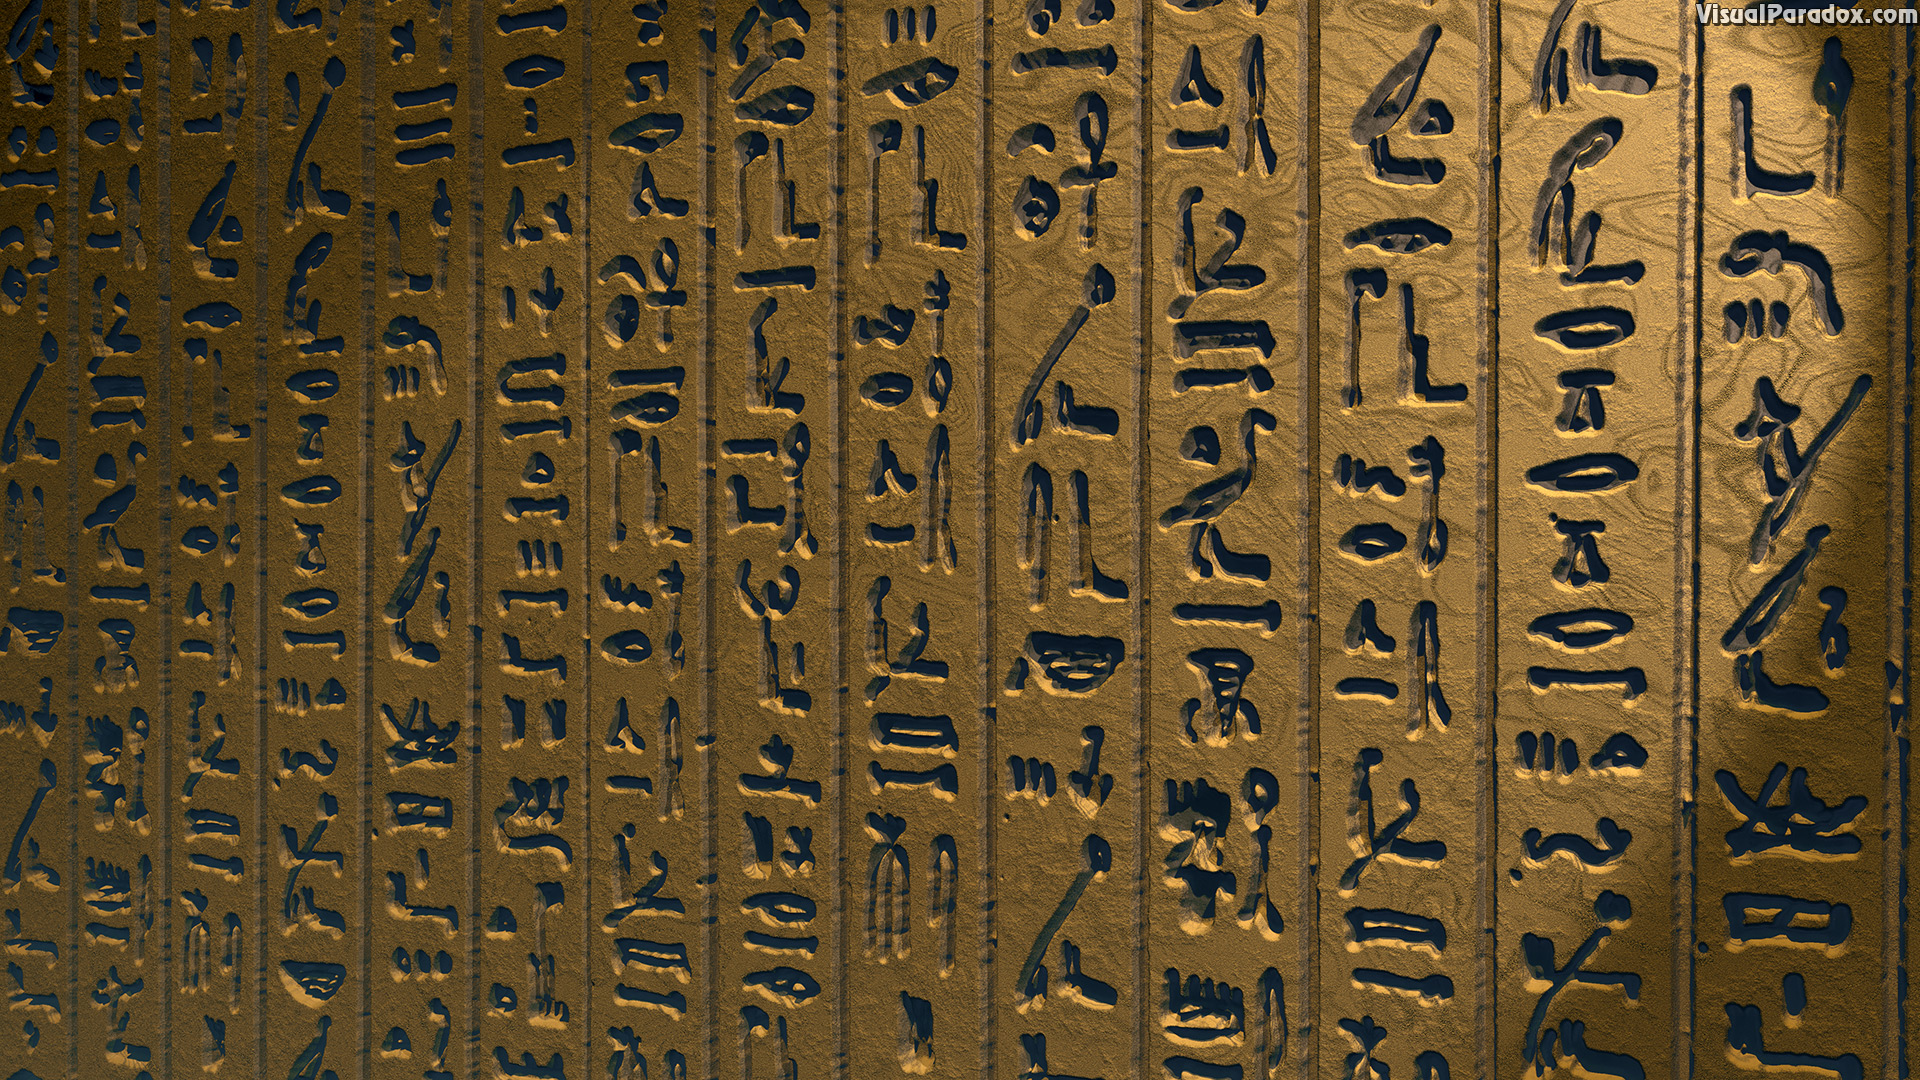 africa, alphabet, ancient, antique, archaeology, architecture, art, attraction, background, brown, building, carving, civilization, close, culture, curse, egypt, egyptian, god, hieroglyph, hieroglyphic, hieroglyphics, historic, history, image, inscription, inscriptions, letter, life, light, luxor, old, past, pattern, pharaoh, pharaohs, rock, ruin, sandstone, shape, sign, stone, symbol, symbols, temple, text, texture, tourism, tourist, traditional, travel, up, wall, warning, word, writing, 3d, wallpaper